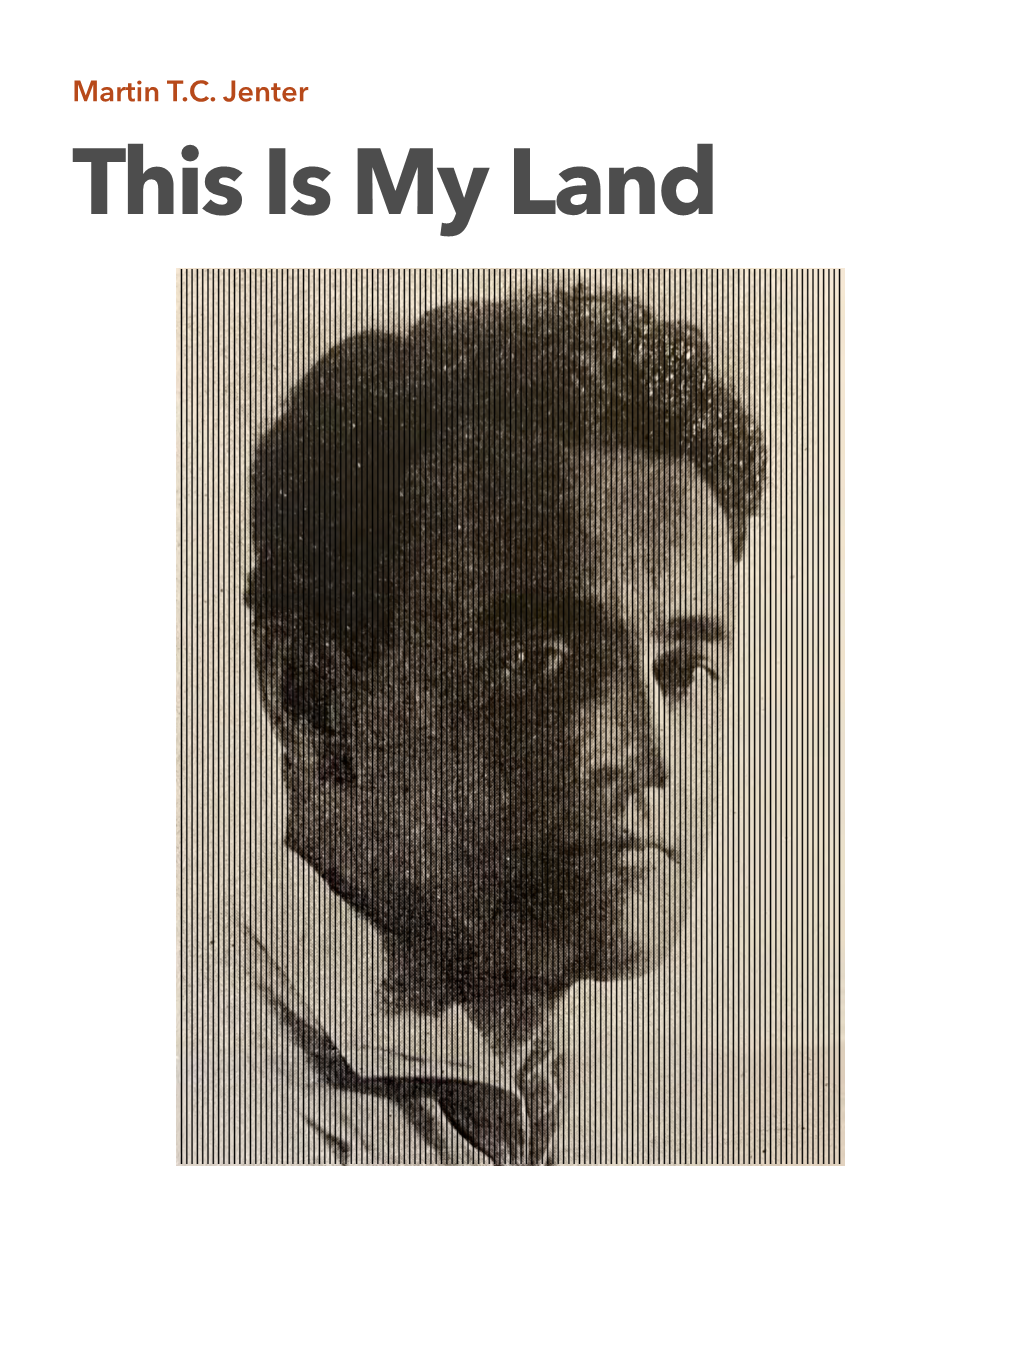 This Is My Land˜